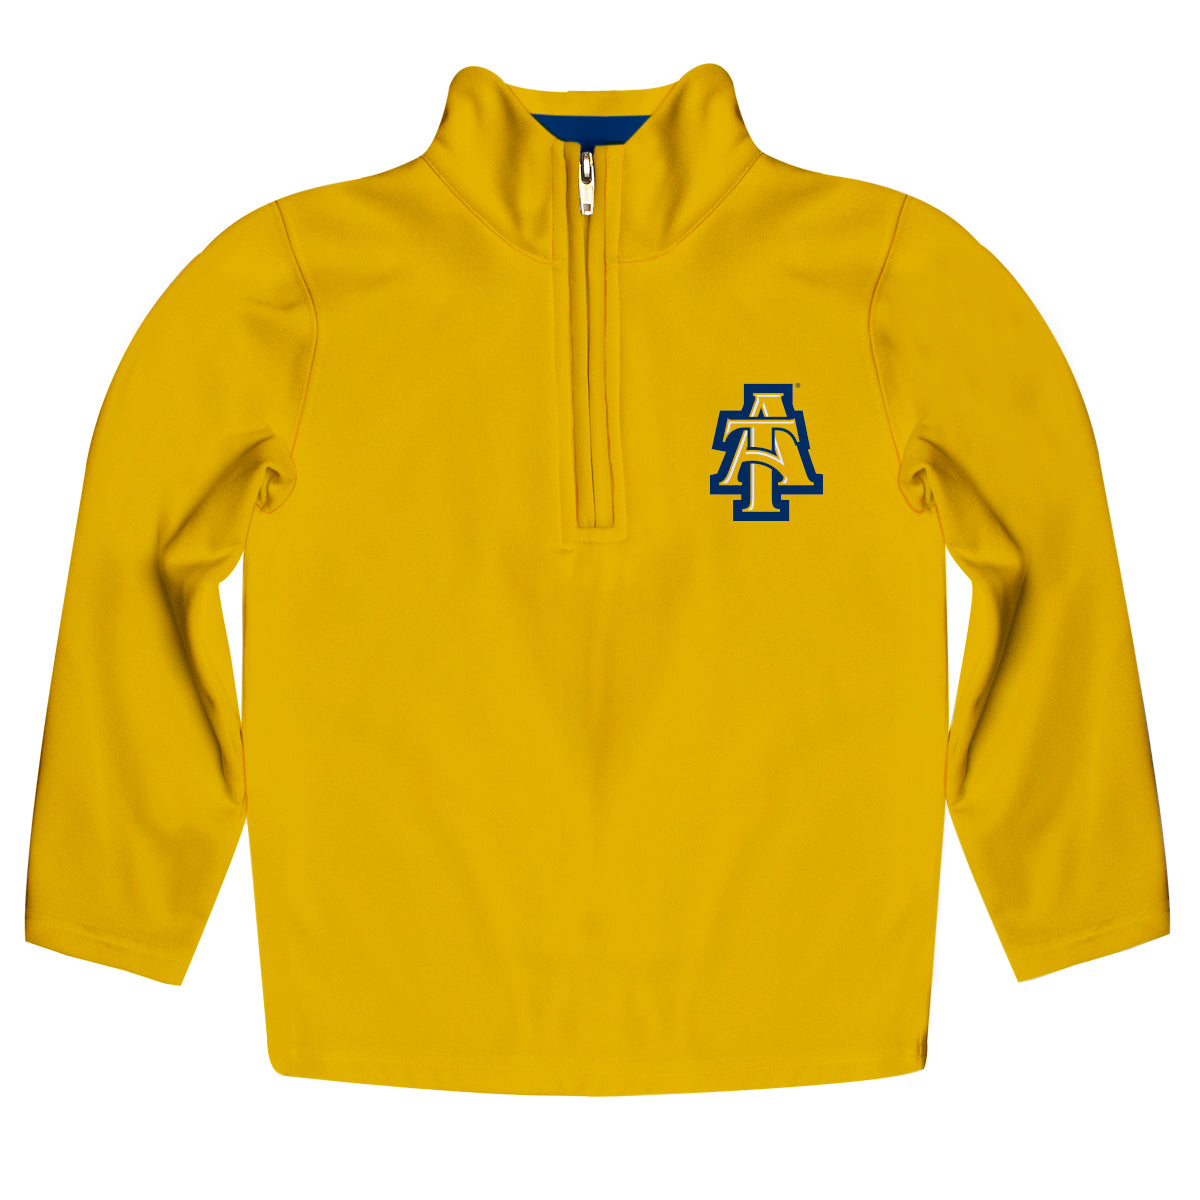 North Carolina A&T Aggies Game Day Solid Gold Quarter Zip Pullover Sweatshirt for Toddlers and Youth, Gold / Toddler - 2